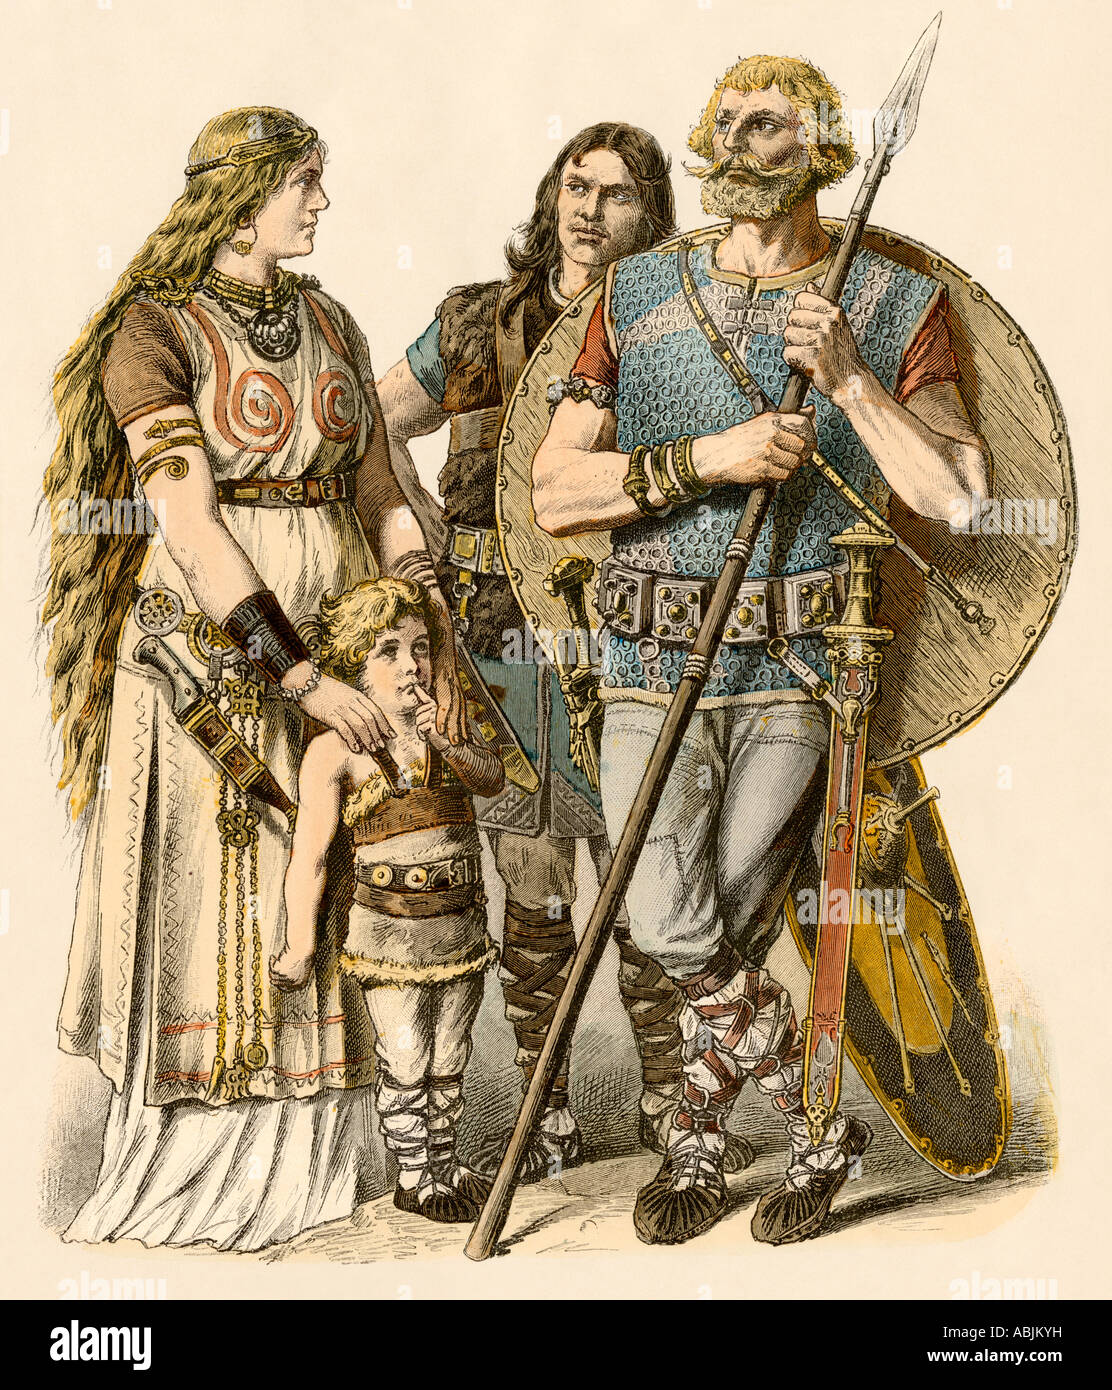 Middle Ages Europeans High Resolution Stock Photography and Images - Alamy